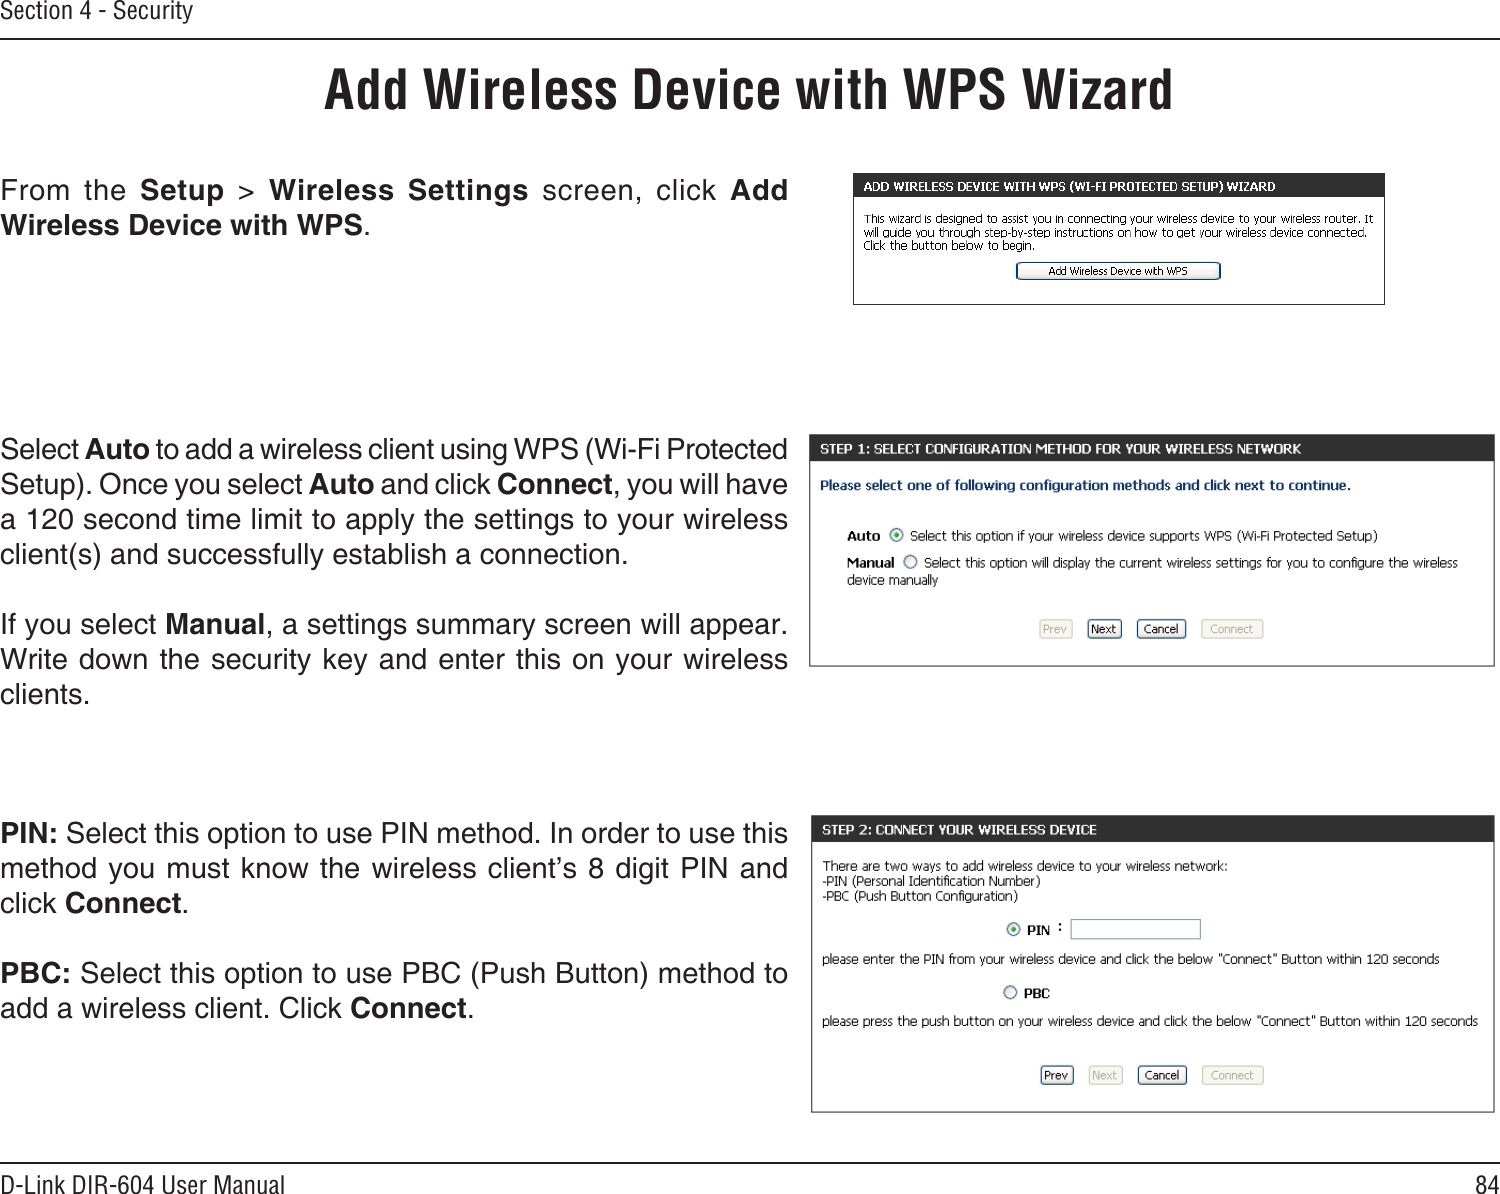 84D-Link DIR-604 User ManualSection 4 - SecurityFrom  the  Setup  &gt;  Wireless  Settings  screen,  click  Add Wireless Device with WPS.Add Wireless Device with WPS WizardPIN: Select this option to use PIN method. In order to use this method you must know the wireless client’s 8 digit PIN and click Connect.PBC: Select this option to use PBC (Push Button) method to add a wireless client. Click Connect.Select Auto to add a wireless client using WPS (Wi-Fi Protected Setup). Once you select Auto and click Connect, you will have a 120 second time limit to apply the settings to your wireless client(s) and successfully establish a connection. If you select Manual, a settings summary screen will appear. Write down the security key and enter this on your wireless clients. 